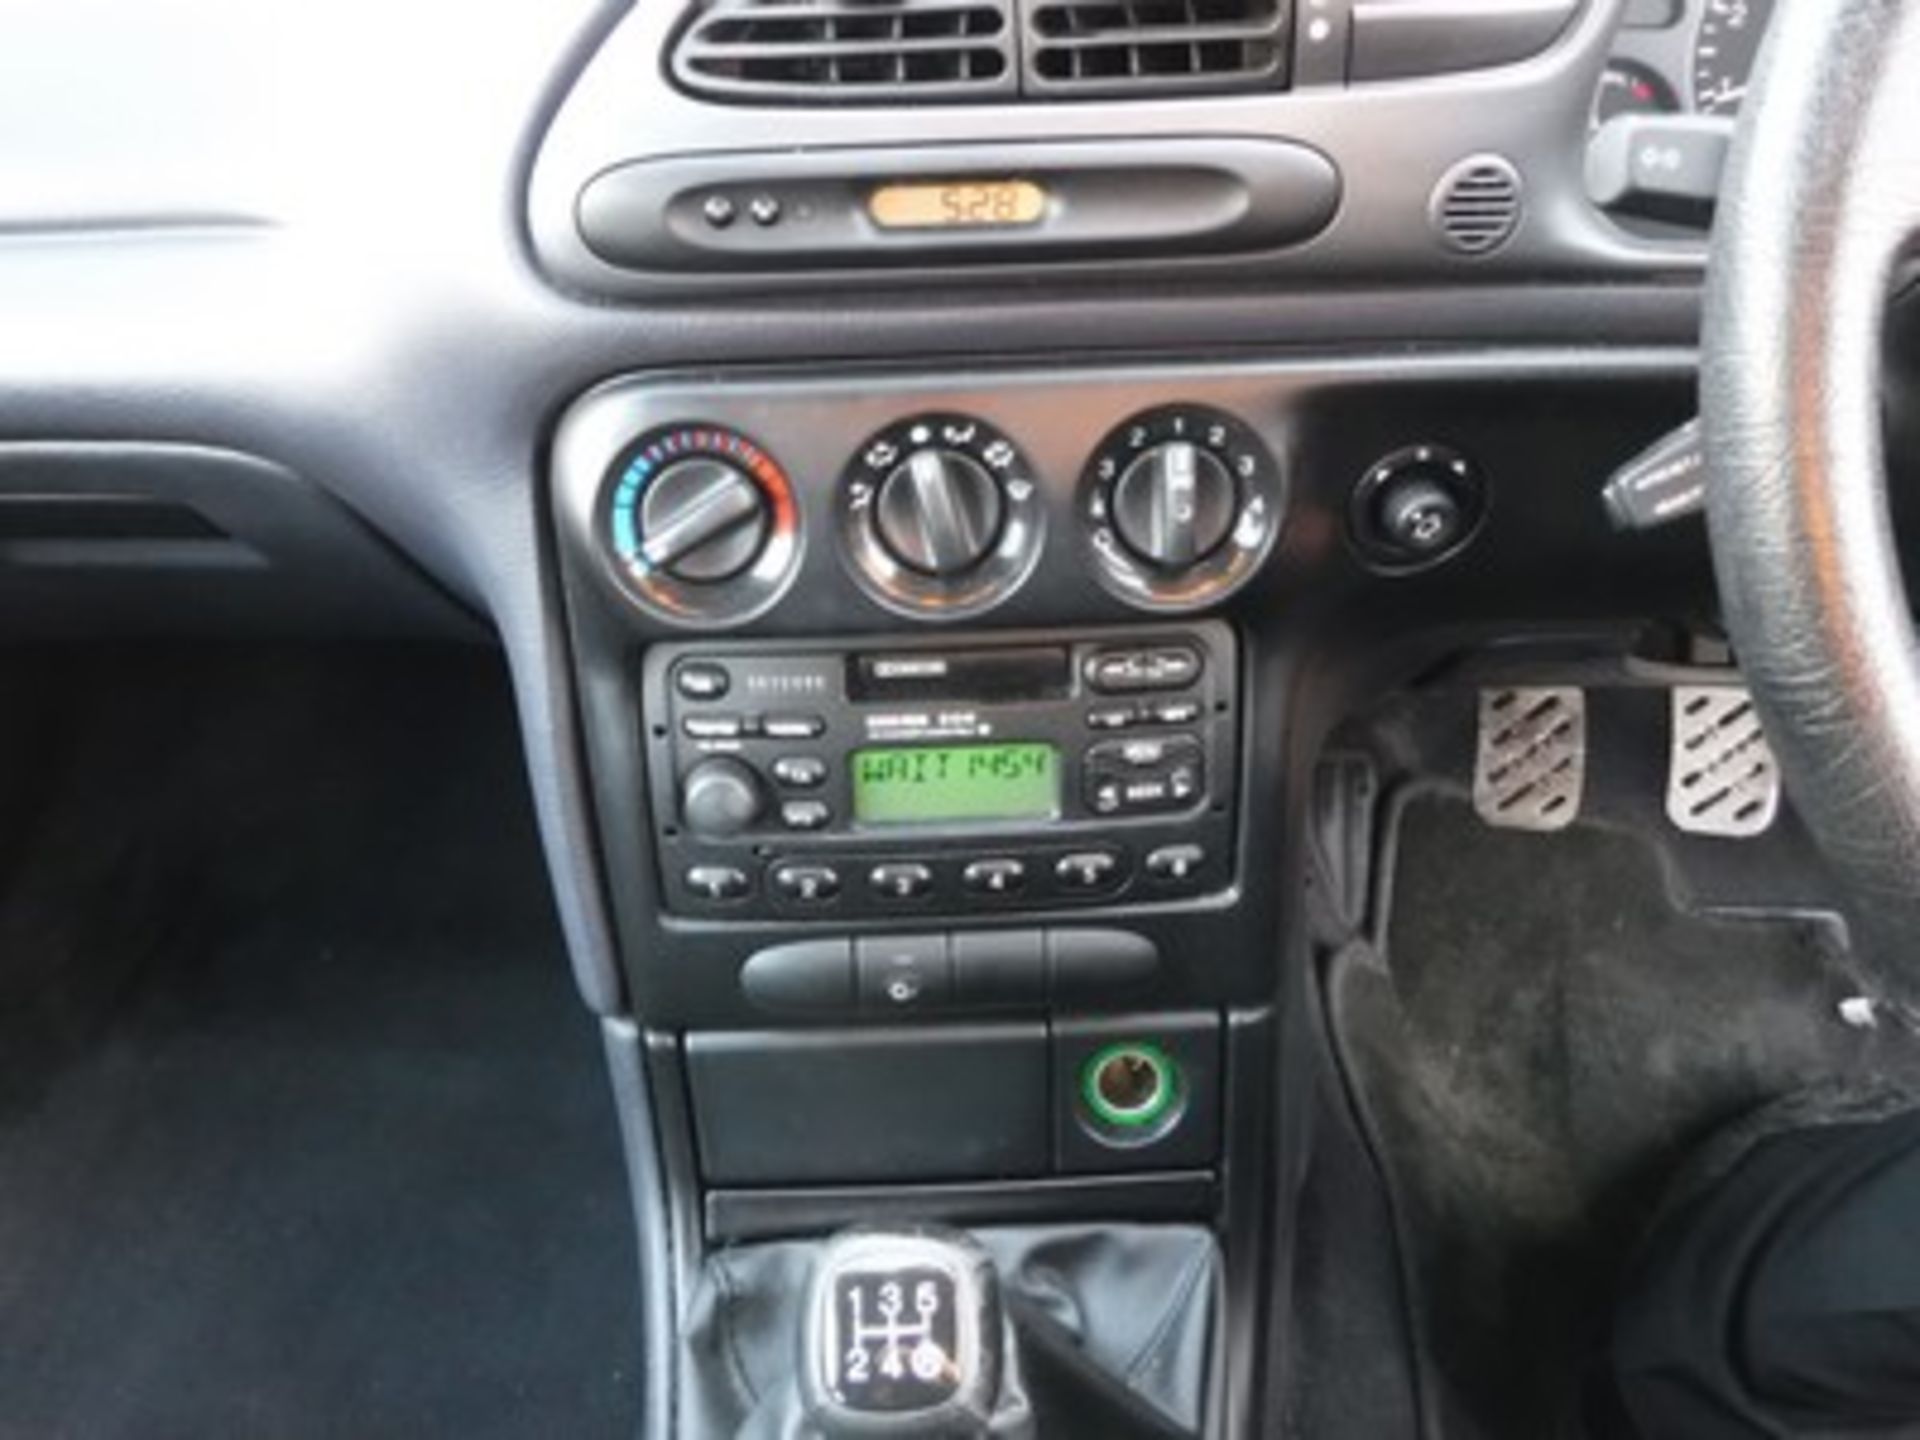 FORD MONDEO ST 24 V6 - 2497cc - Image 21 of 24